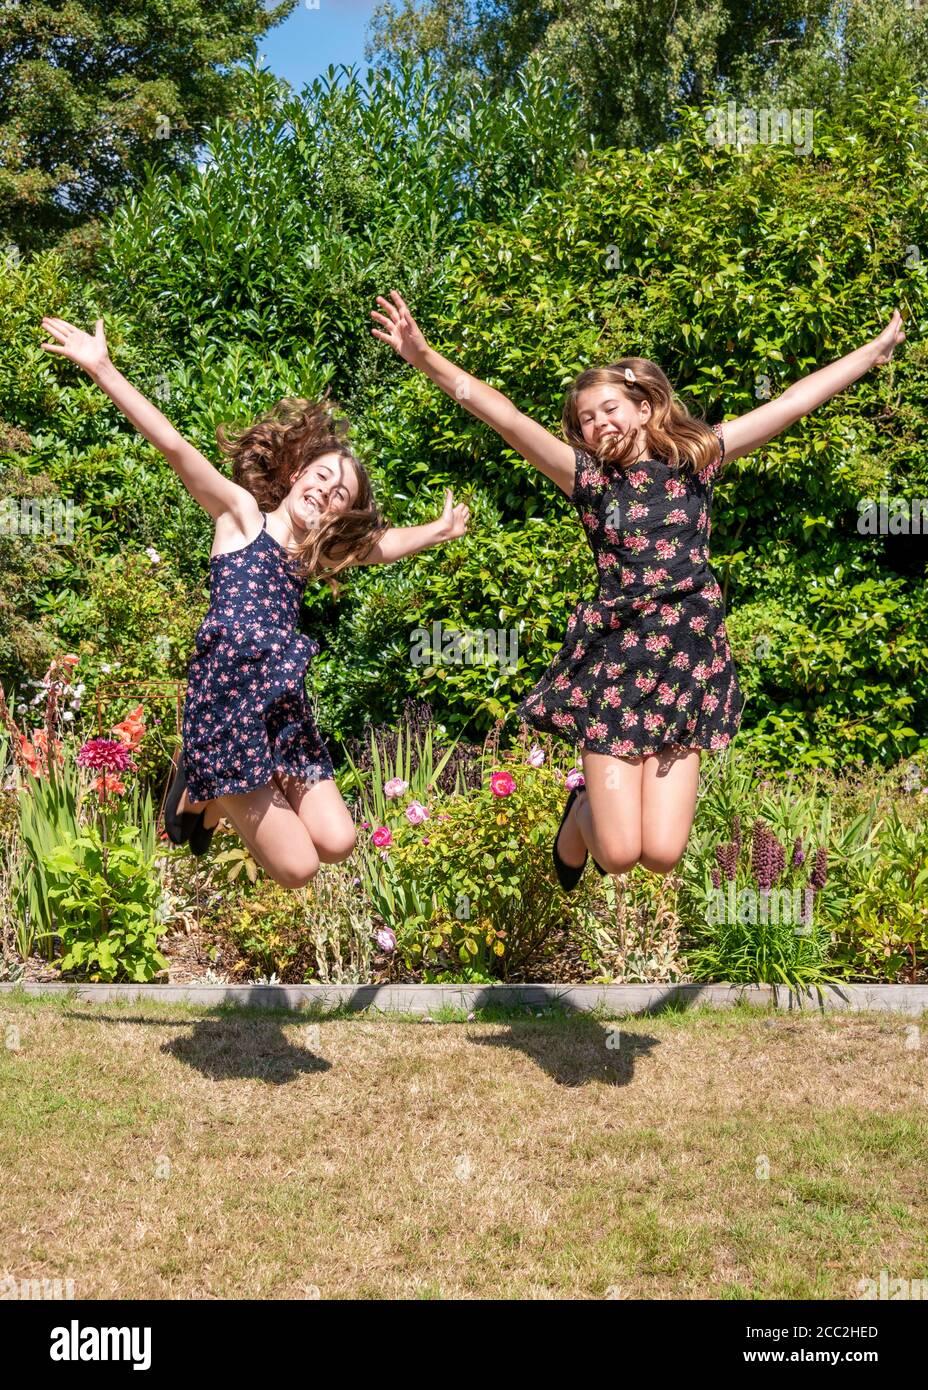 Vertical portrait of two young girls jumping with excitement with their arms outstretched in the garden. Stock Photo